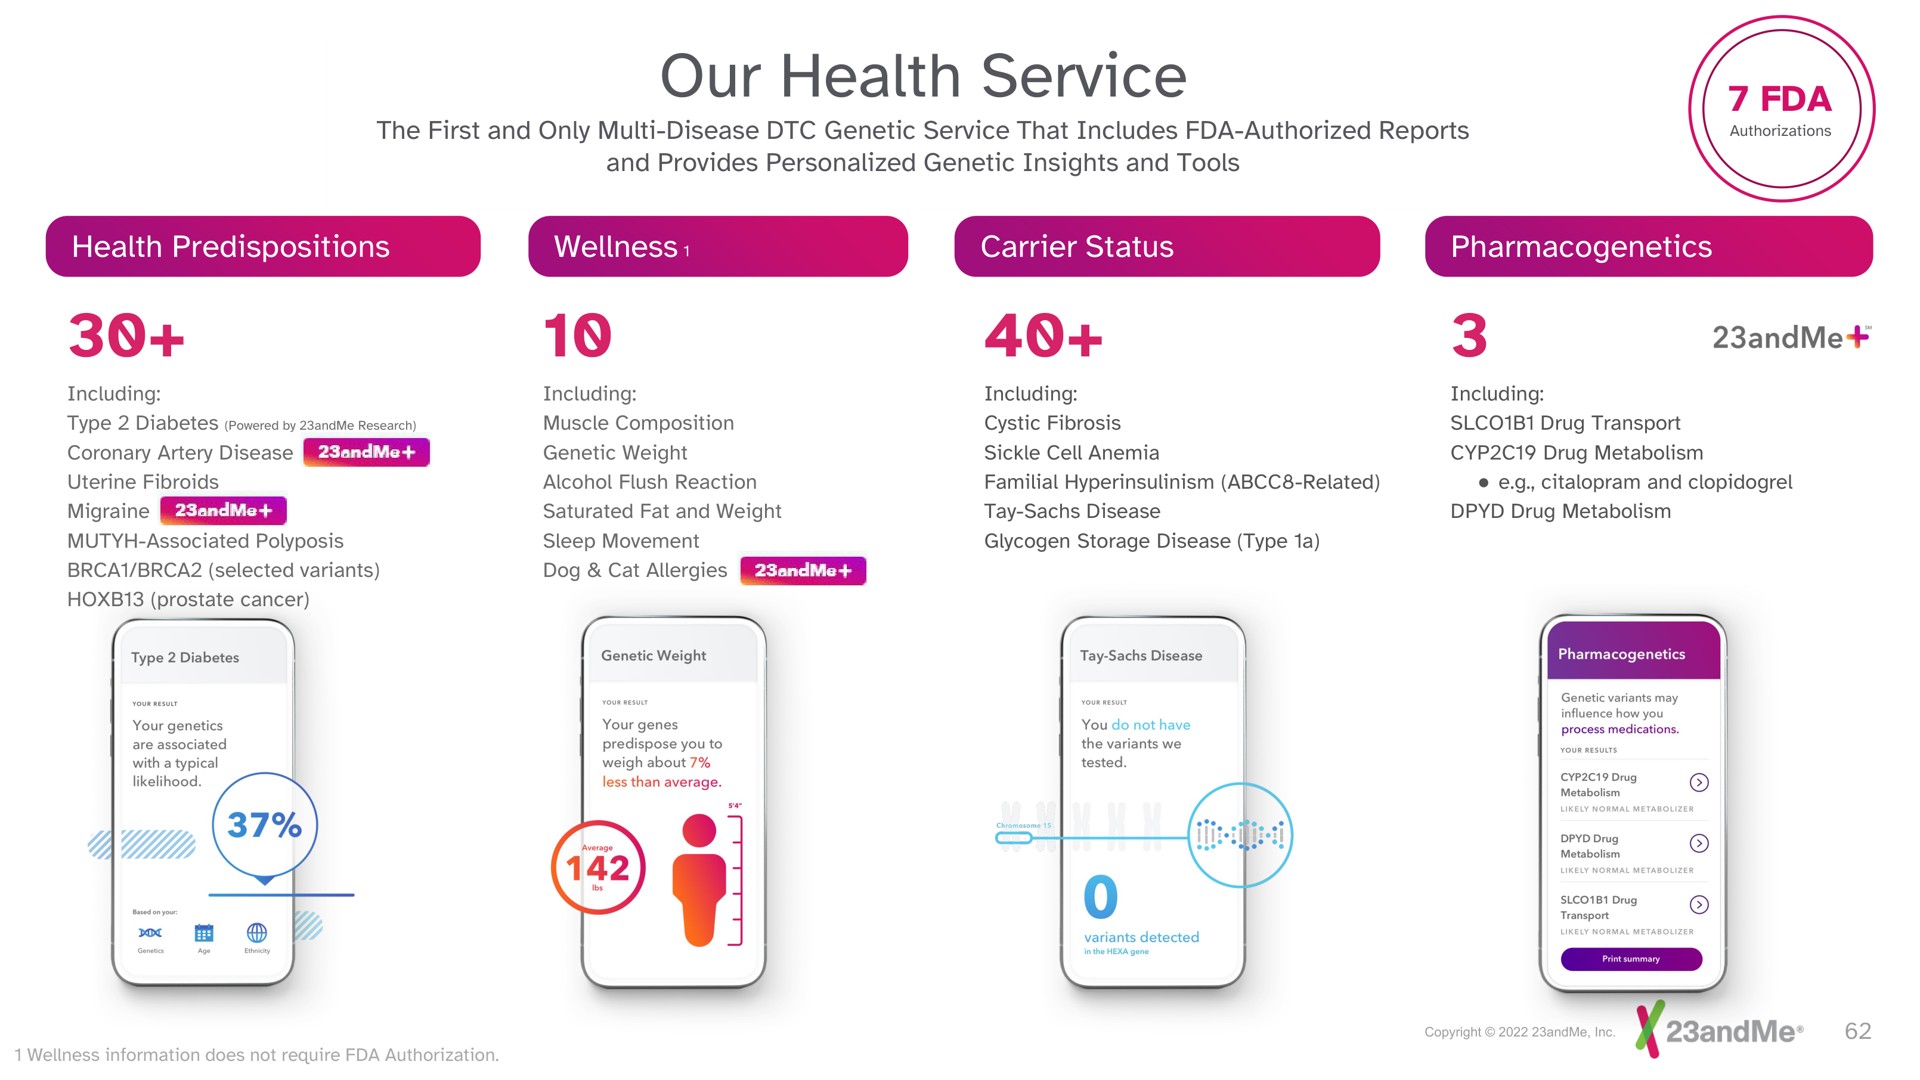 our health service | 23andMe